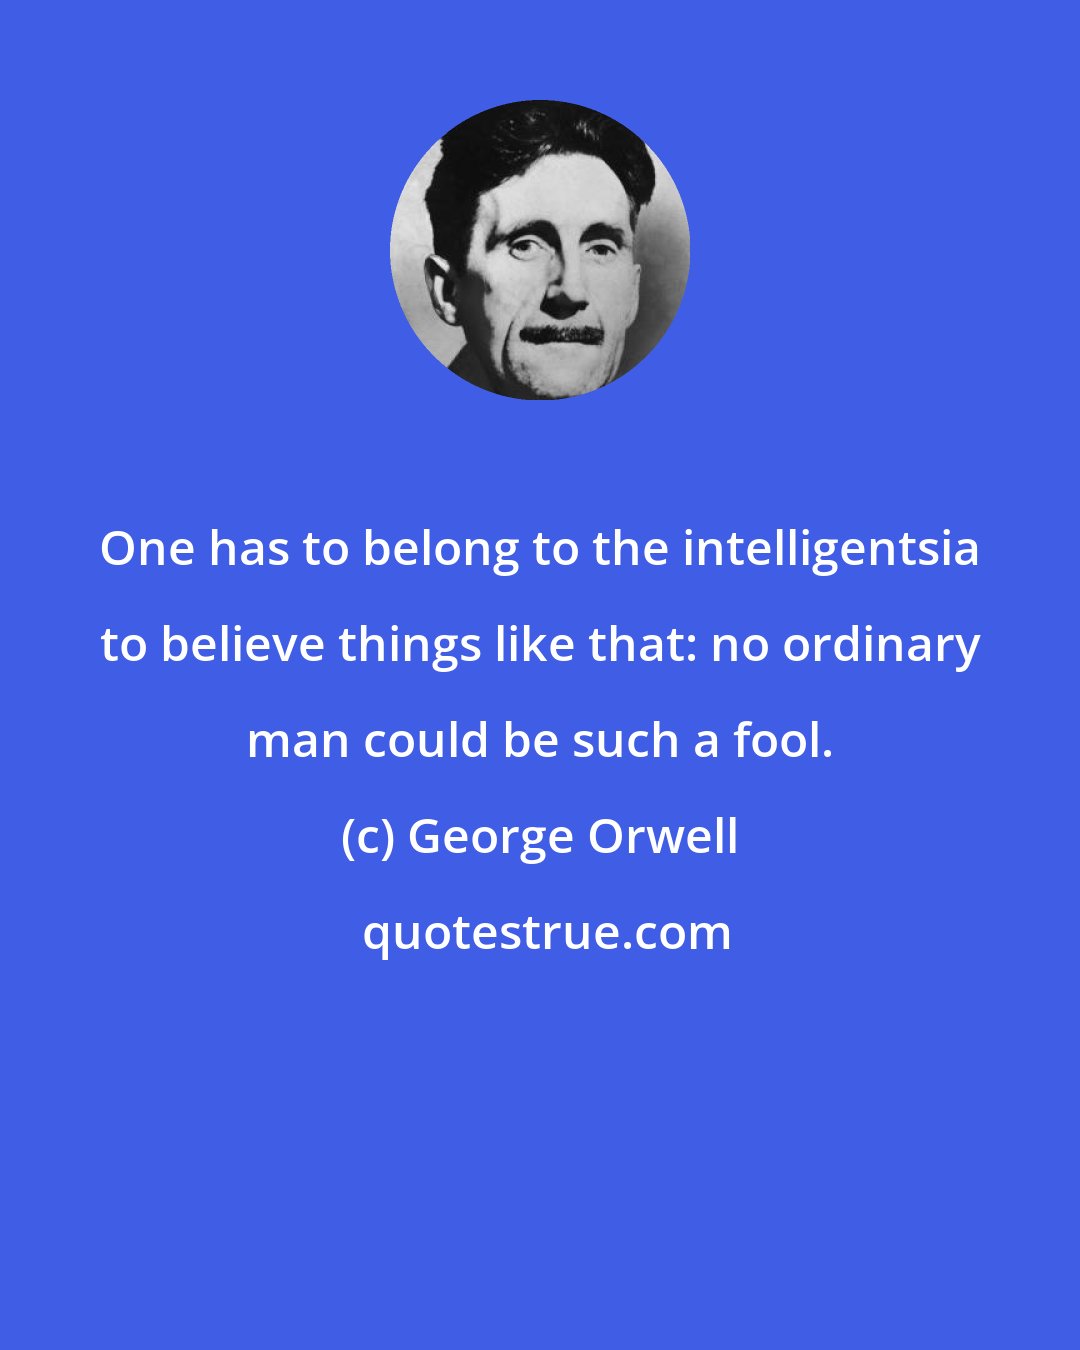 George Orwell: One has to belong to the intelligentsia to believe things like that: no ordinary man could be such a fool.